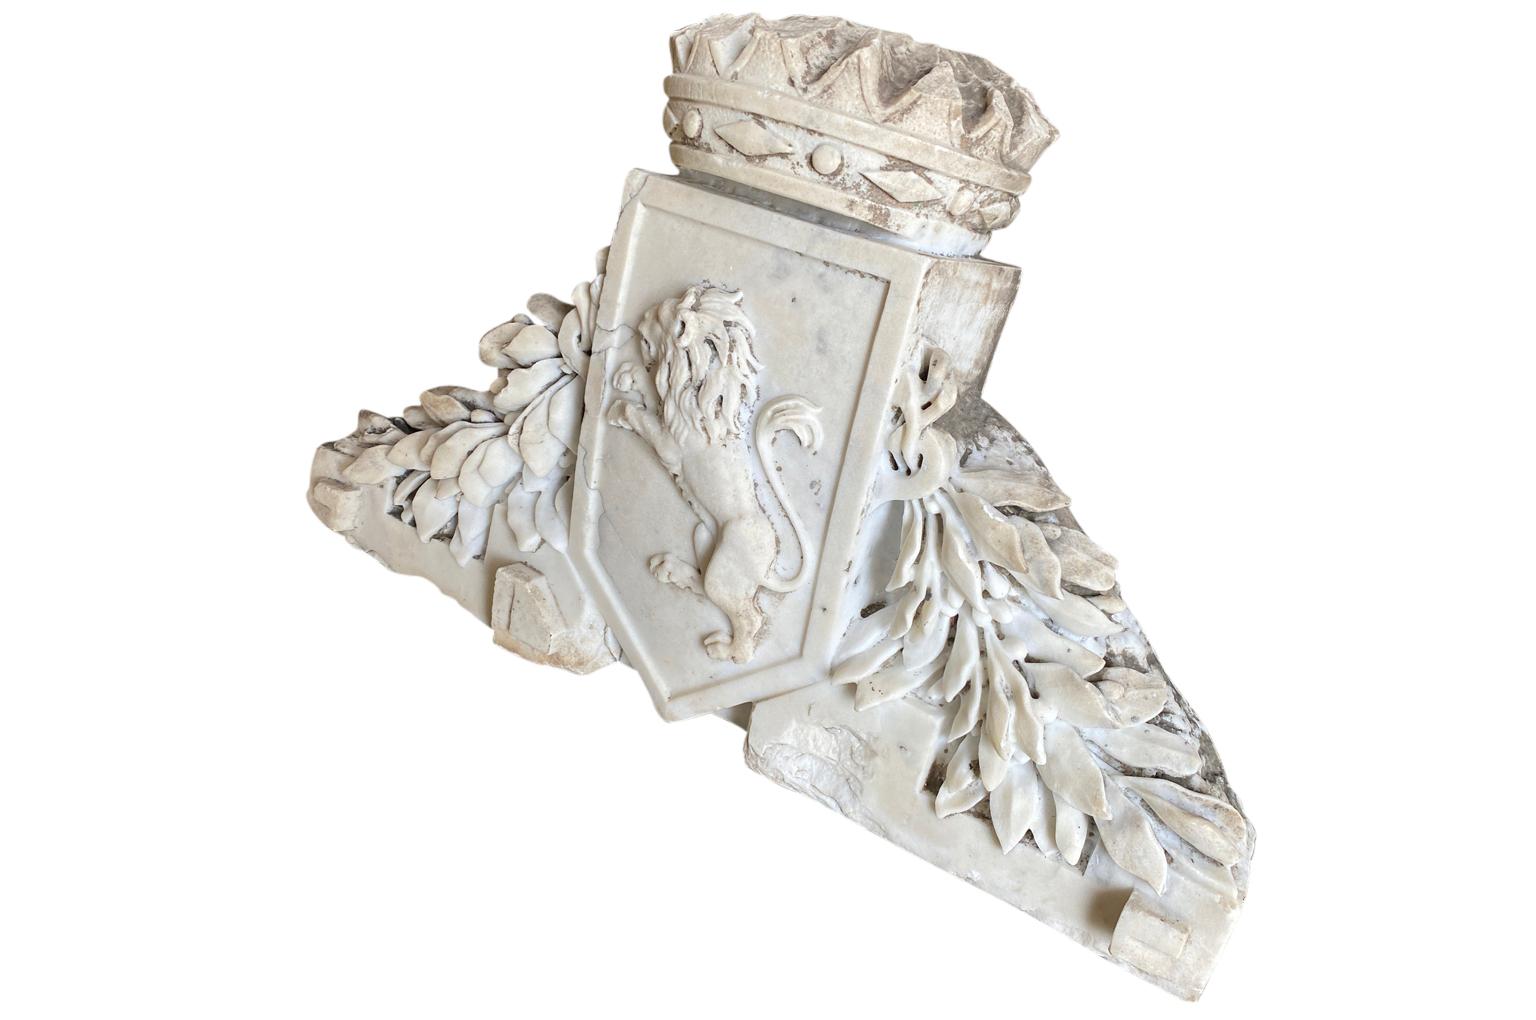 A very stunning 18th century Italian Blasson - Family Crest. Expertly carved from Carrara Marble with heraldic lion, a crown and vines. A spectacular piece for any interior of garden.